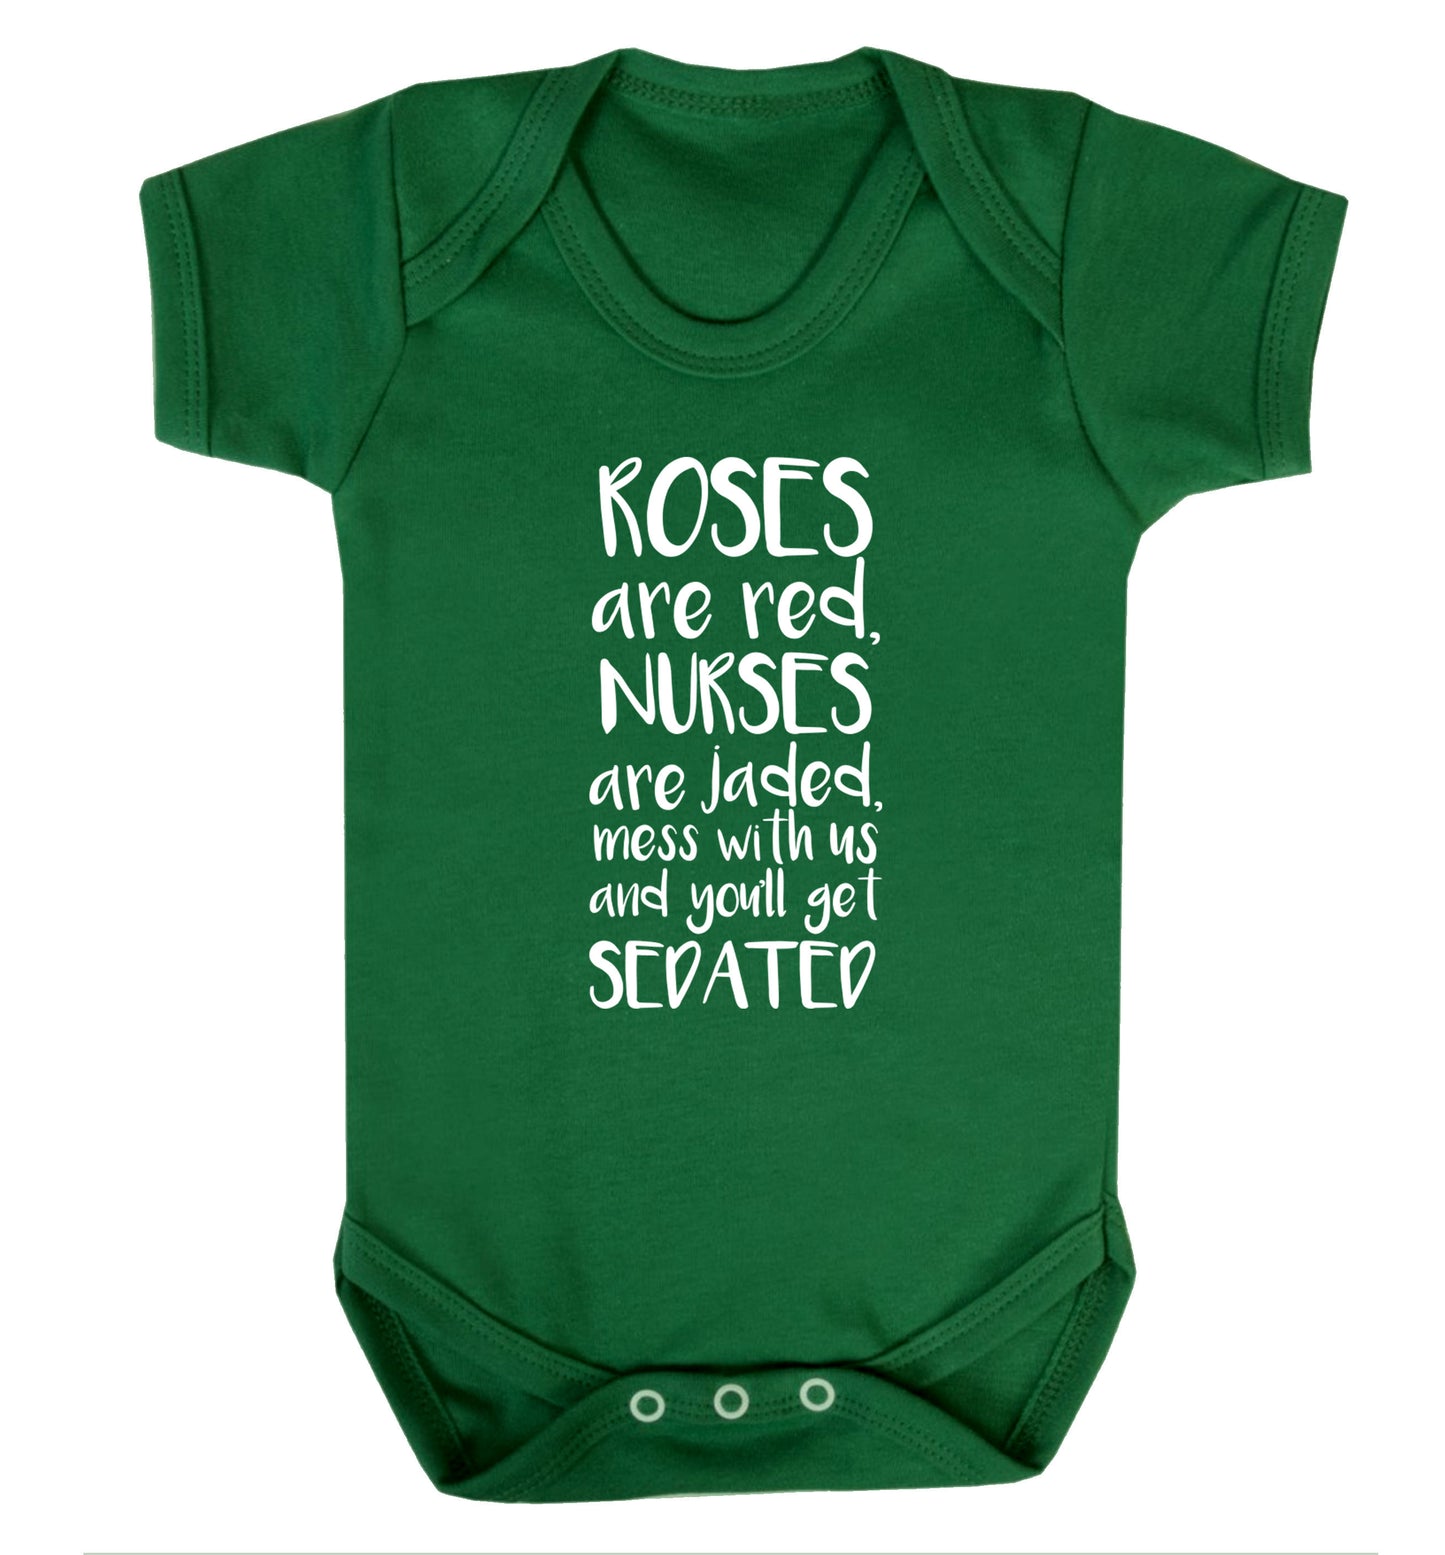 Roses are red, nurses are jaded, mess with us and you'll get sedated Baby Vest green 18-24 months